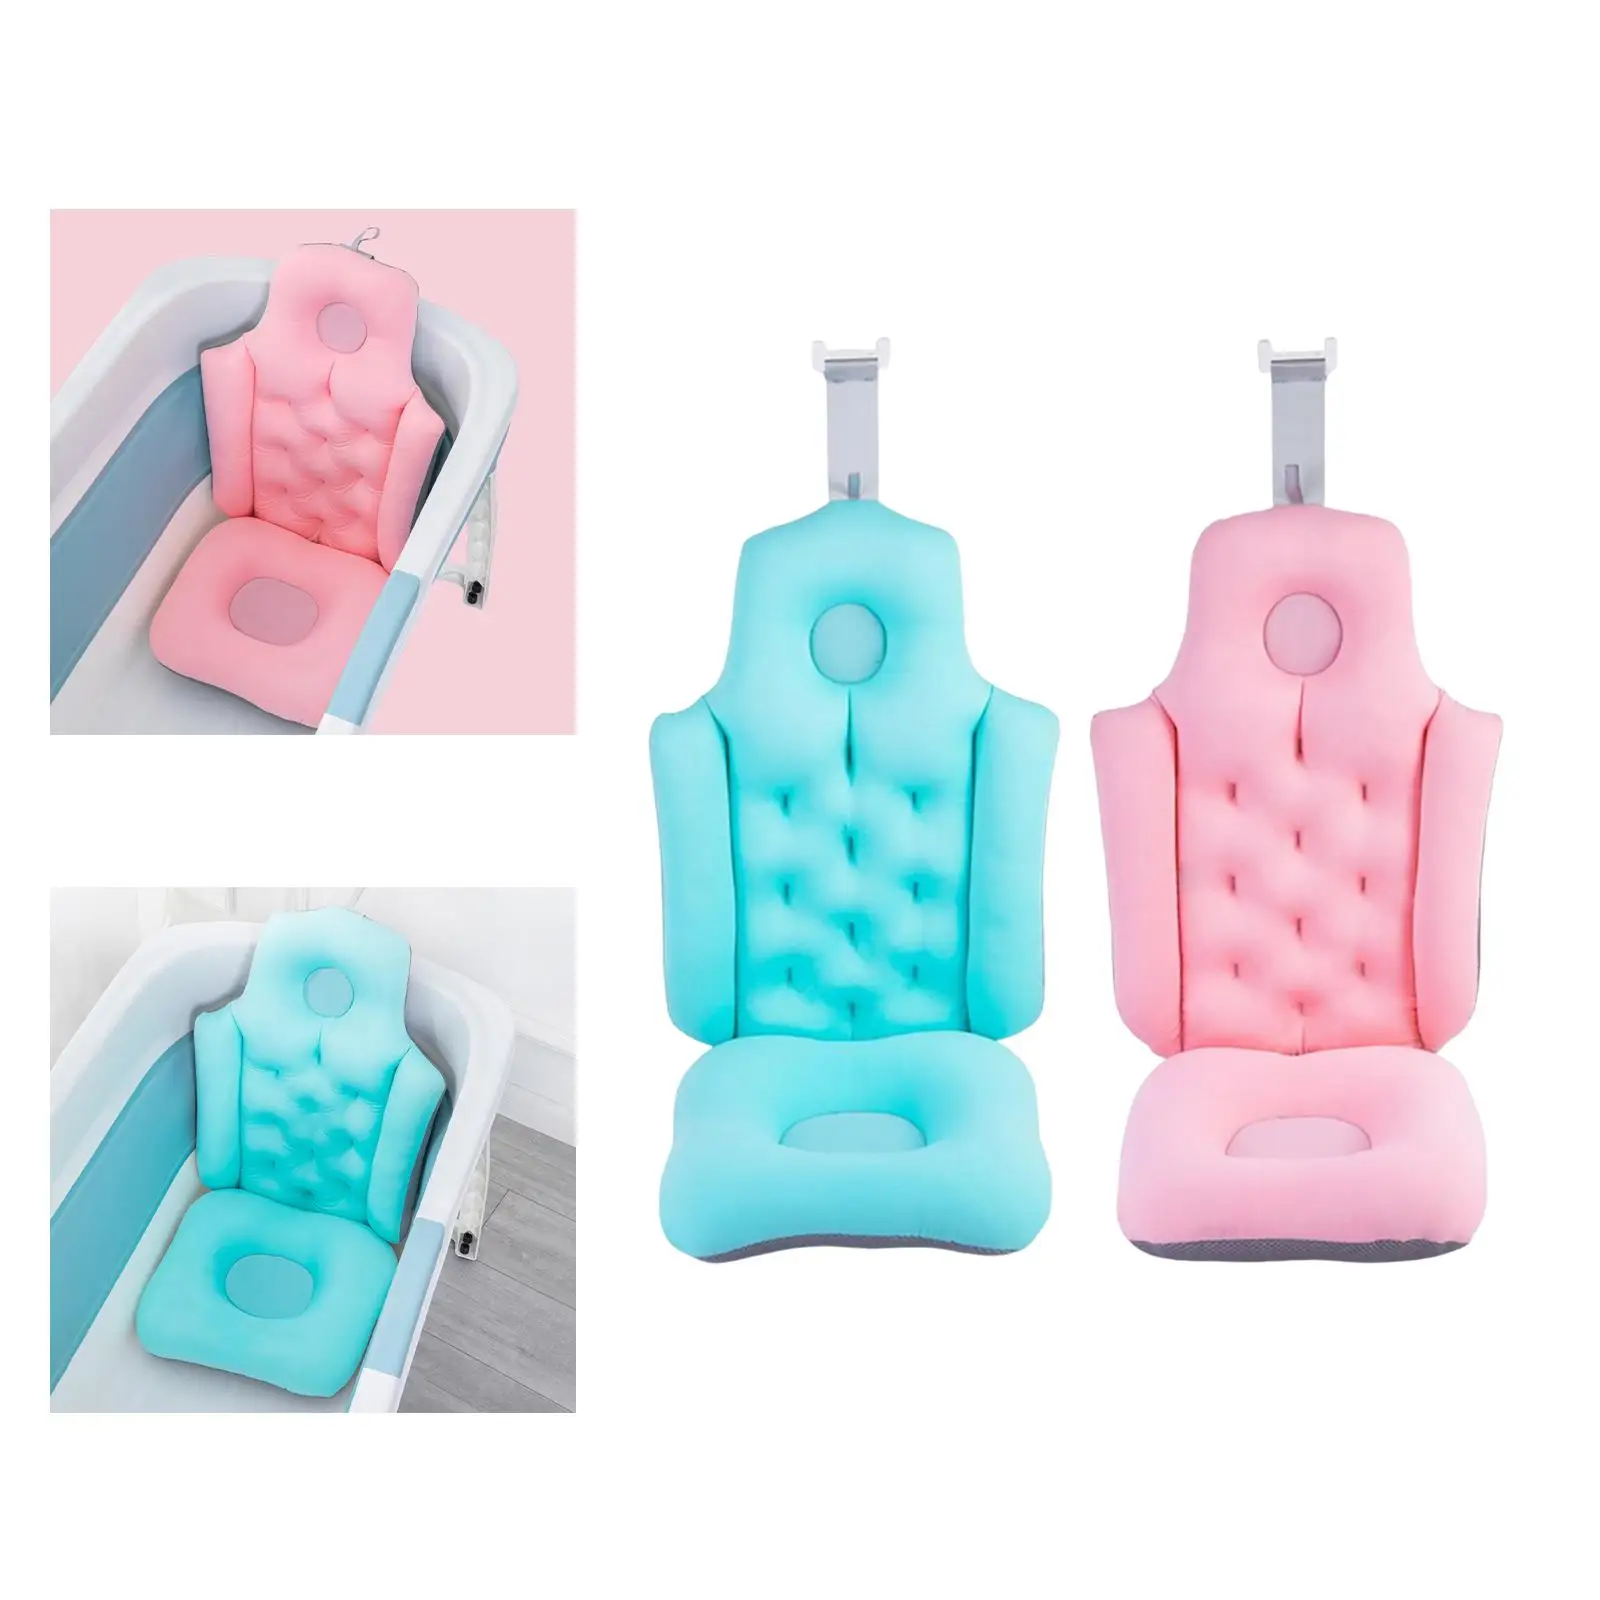 Full Body Bath Pillow Accessories Tub shoulder Support Breathable Waterproof Cushion Shower Pillow for Bathroom